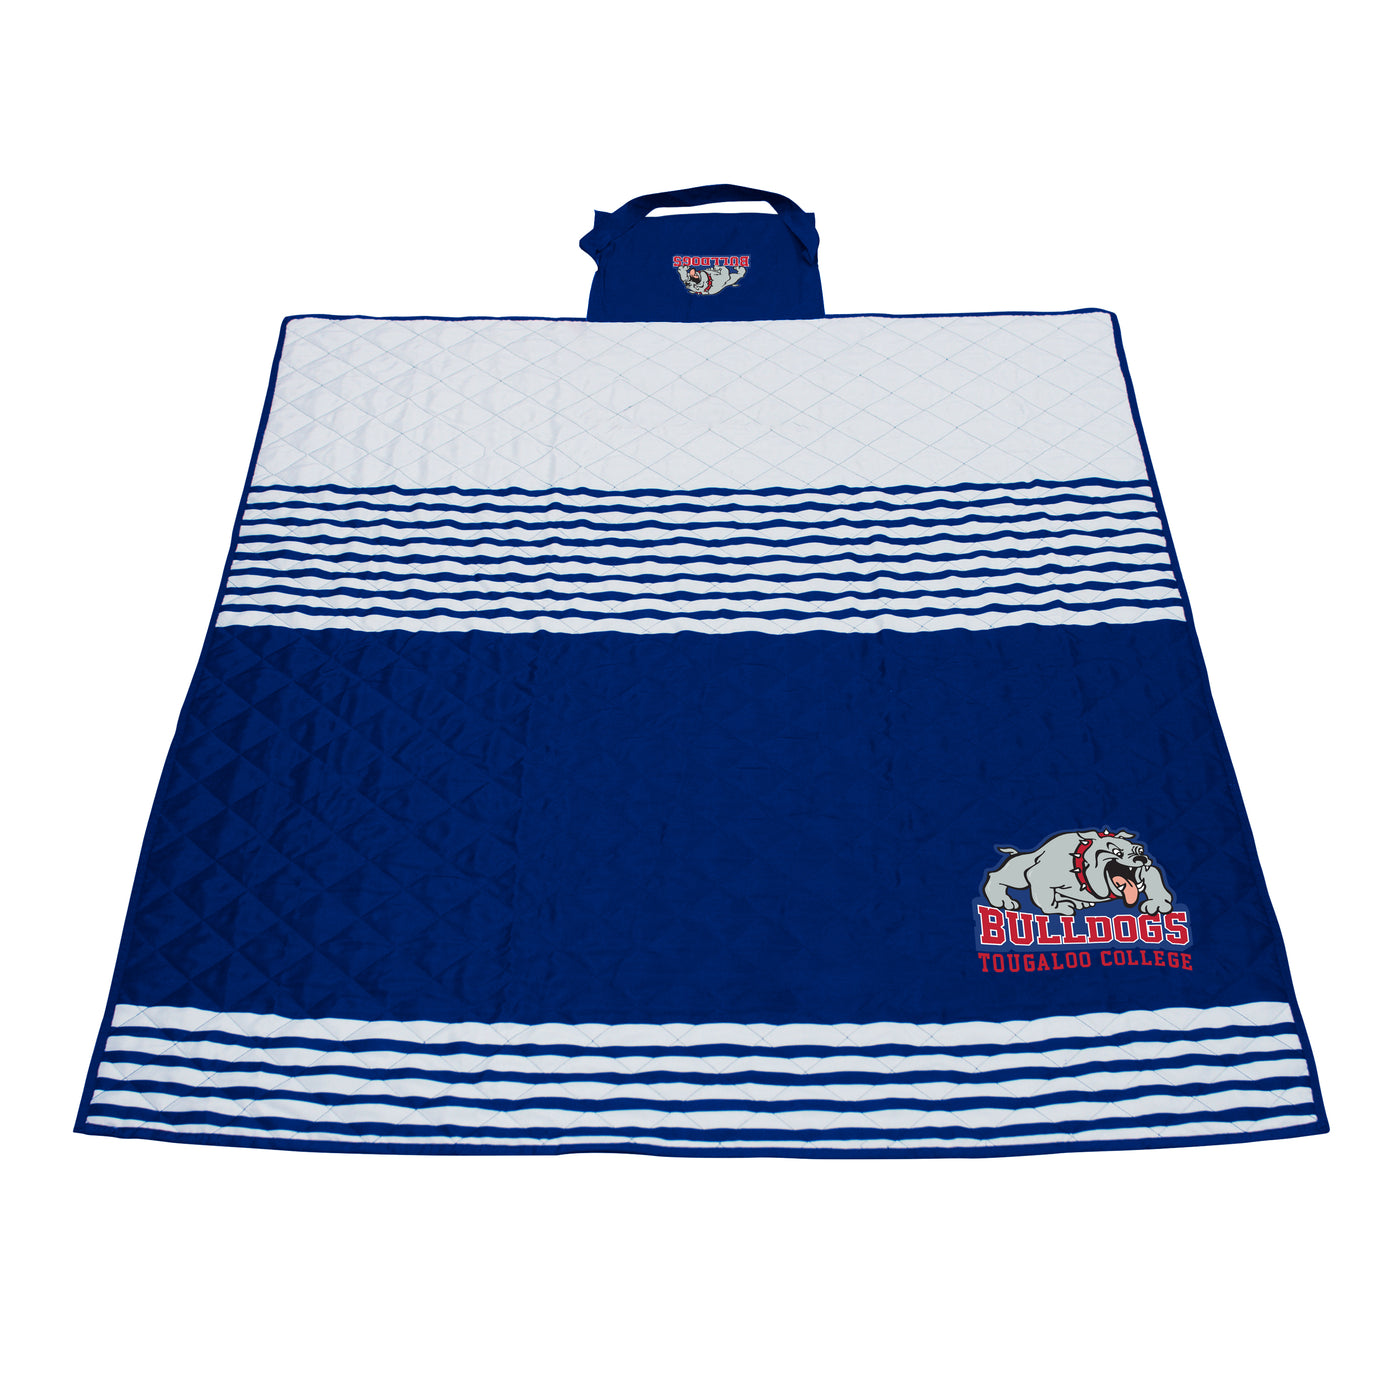 Tougaloo College Outdoor Blanket